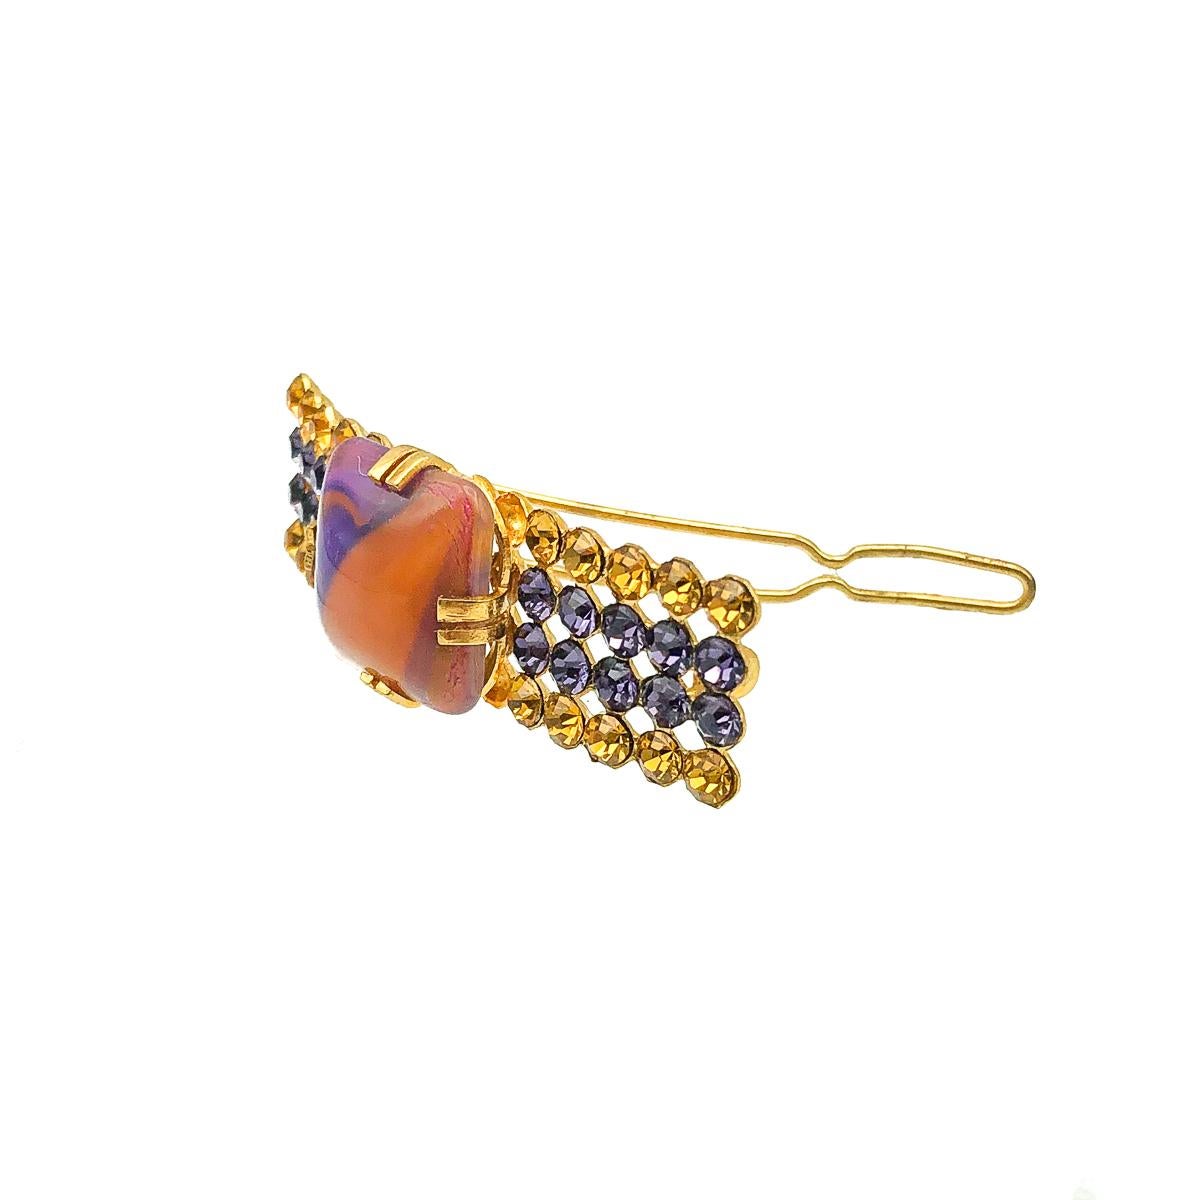 A Vintage French Hairslide. Featuring rich colours of gold and purple for a glorious contrast. Incorporating a large claw set, central art glass stone with gold and amethyst paste chatons sitting in four rows on either side. Set in gold plated